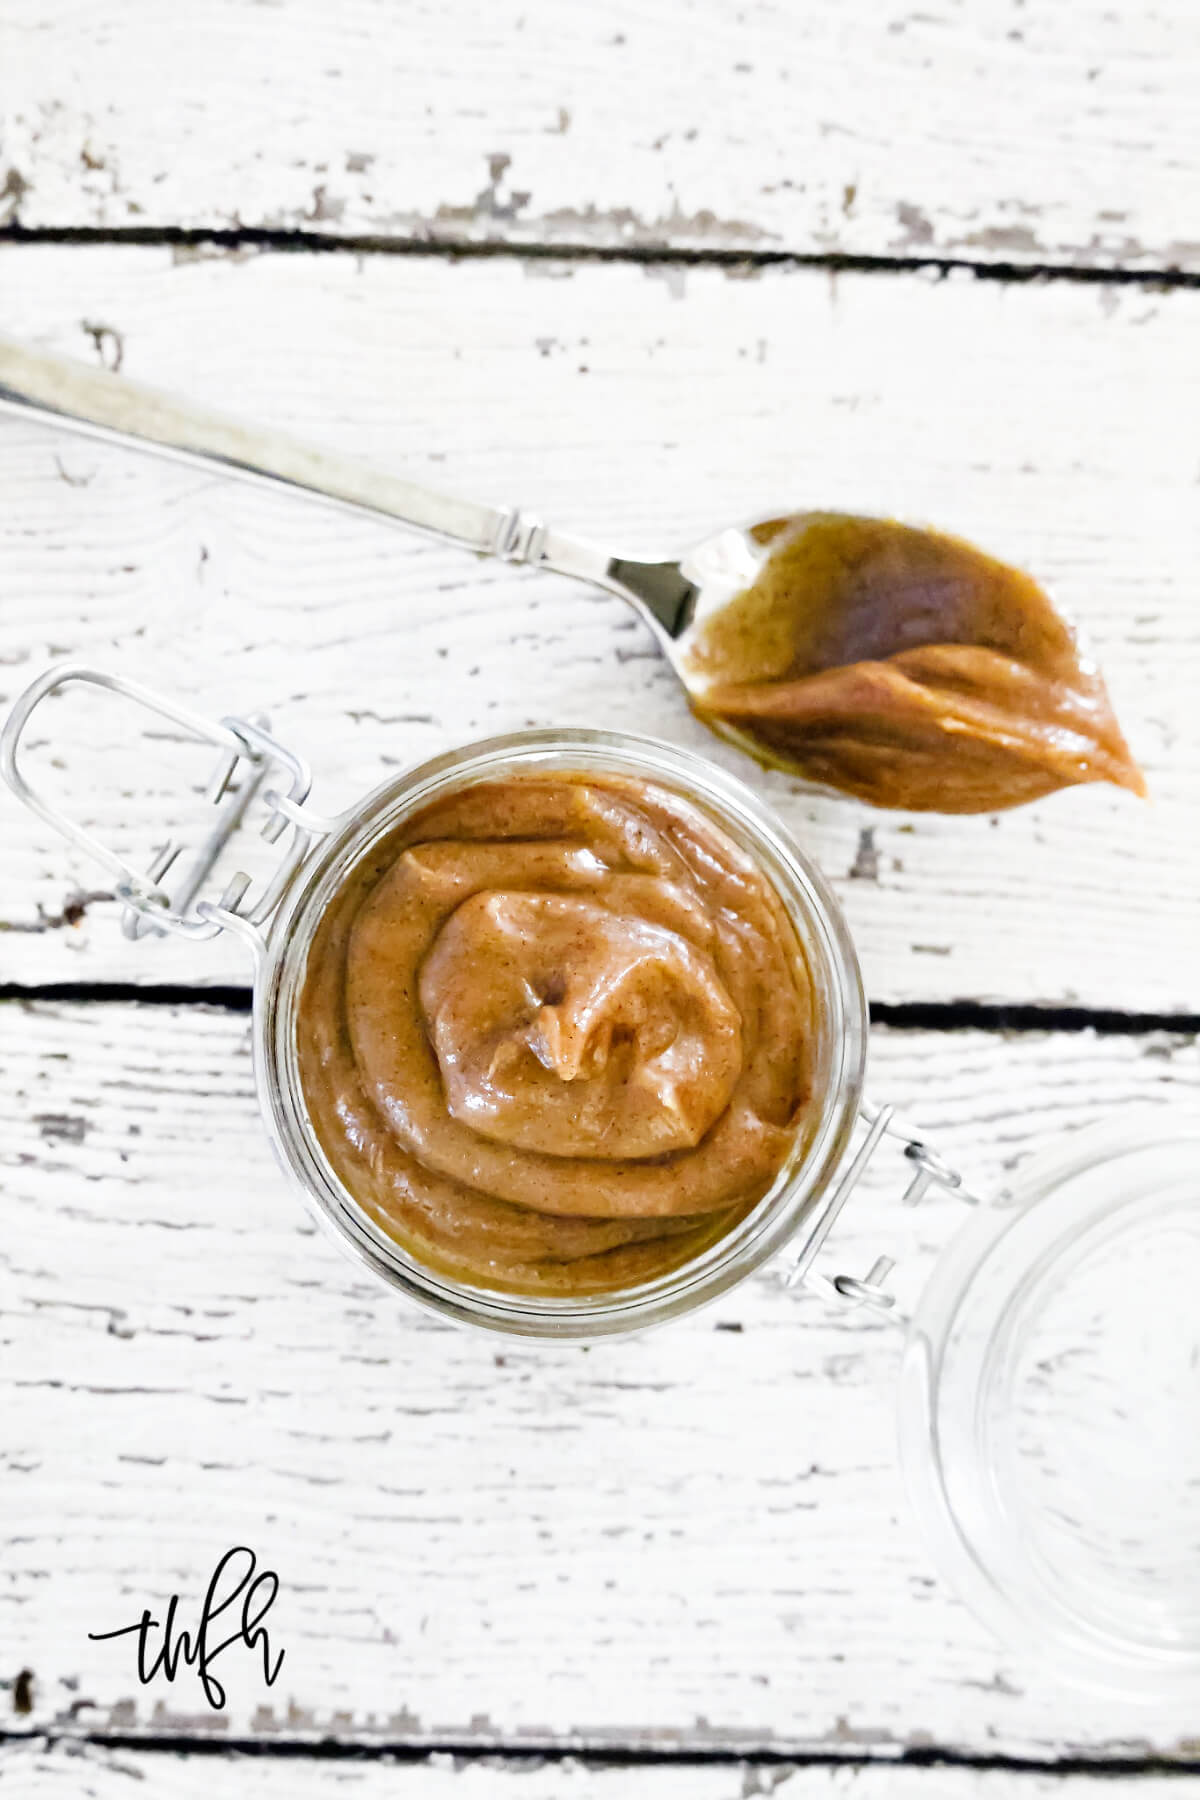 Vertical image of a small glass jar filled with homemade caramel on top of a weathered wooden surface